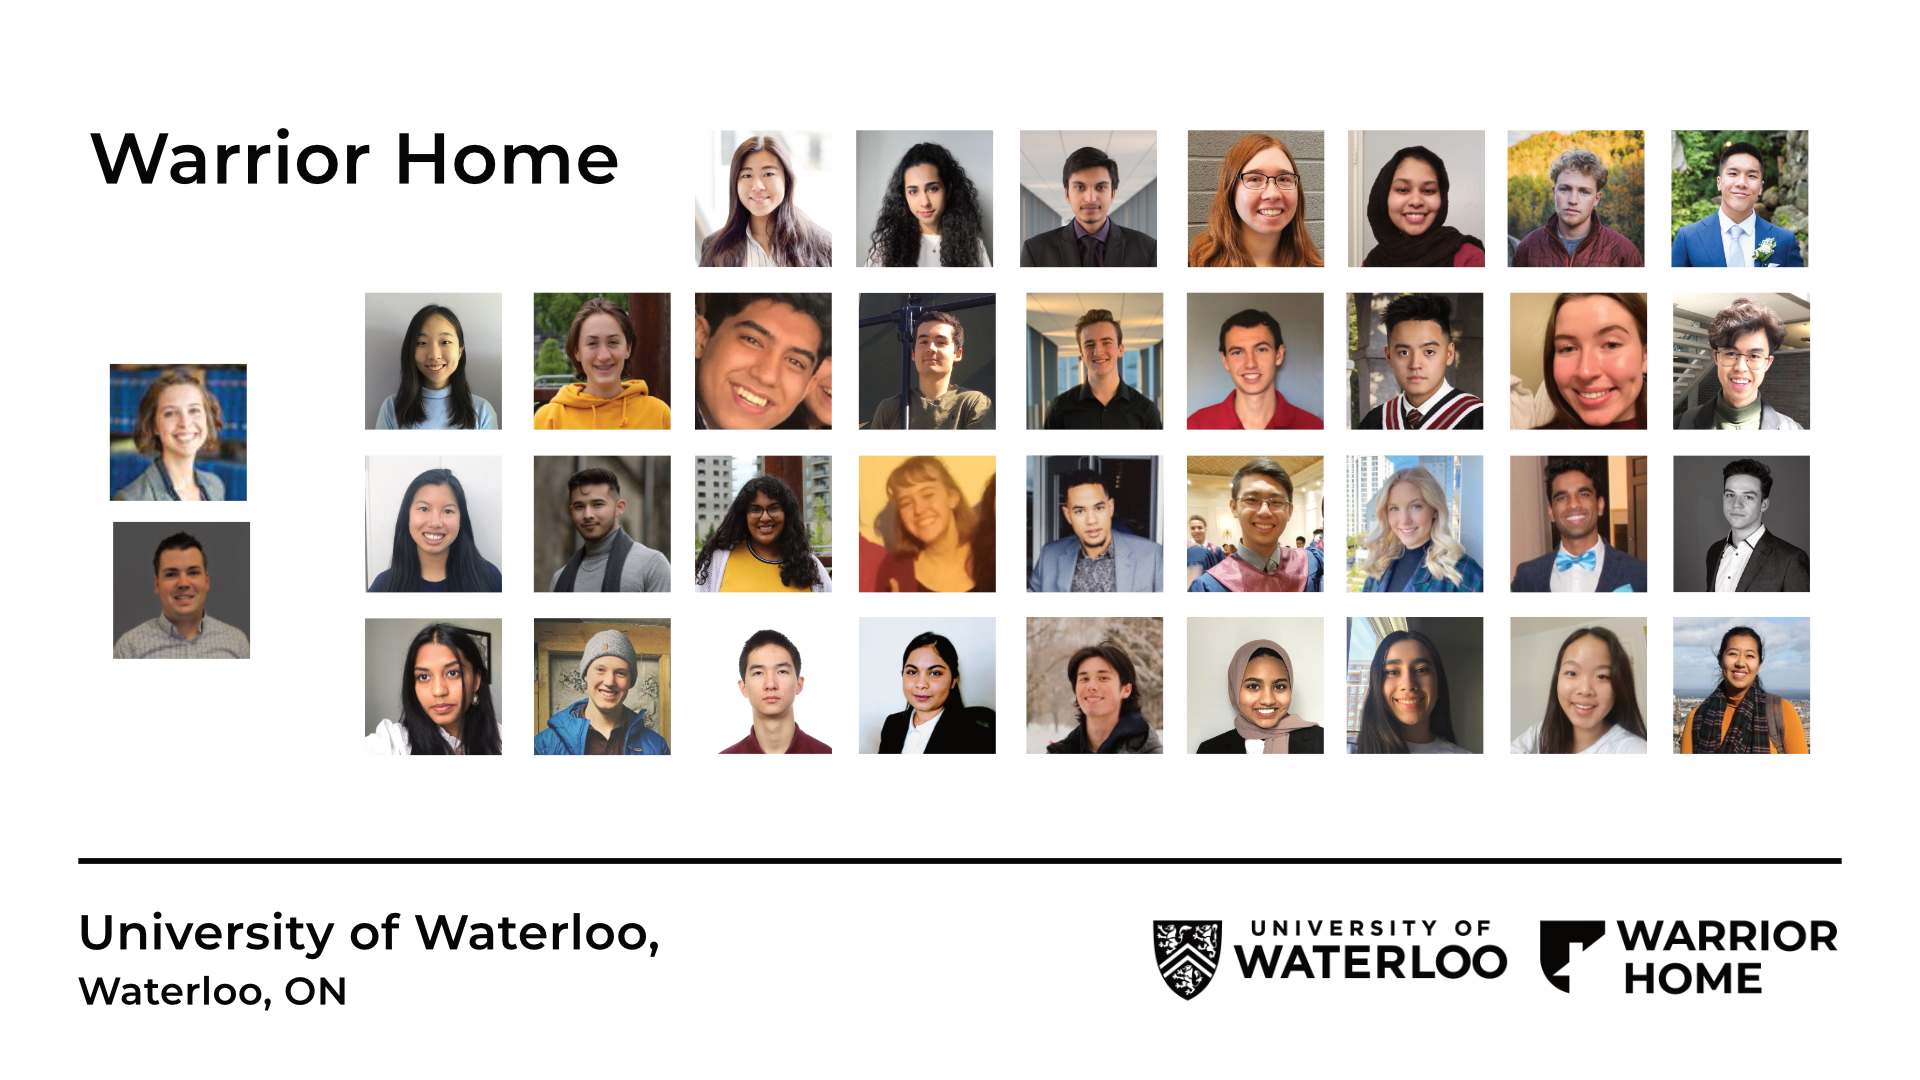 A virtual group photograph of the Warrior Home student design team.